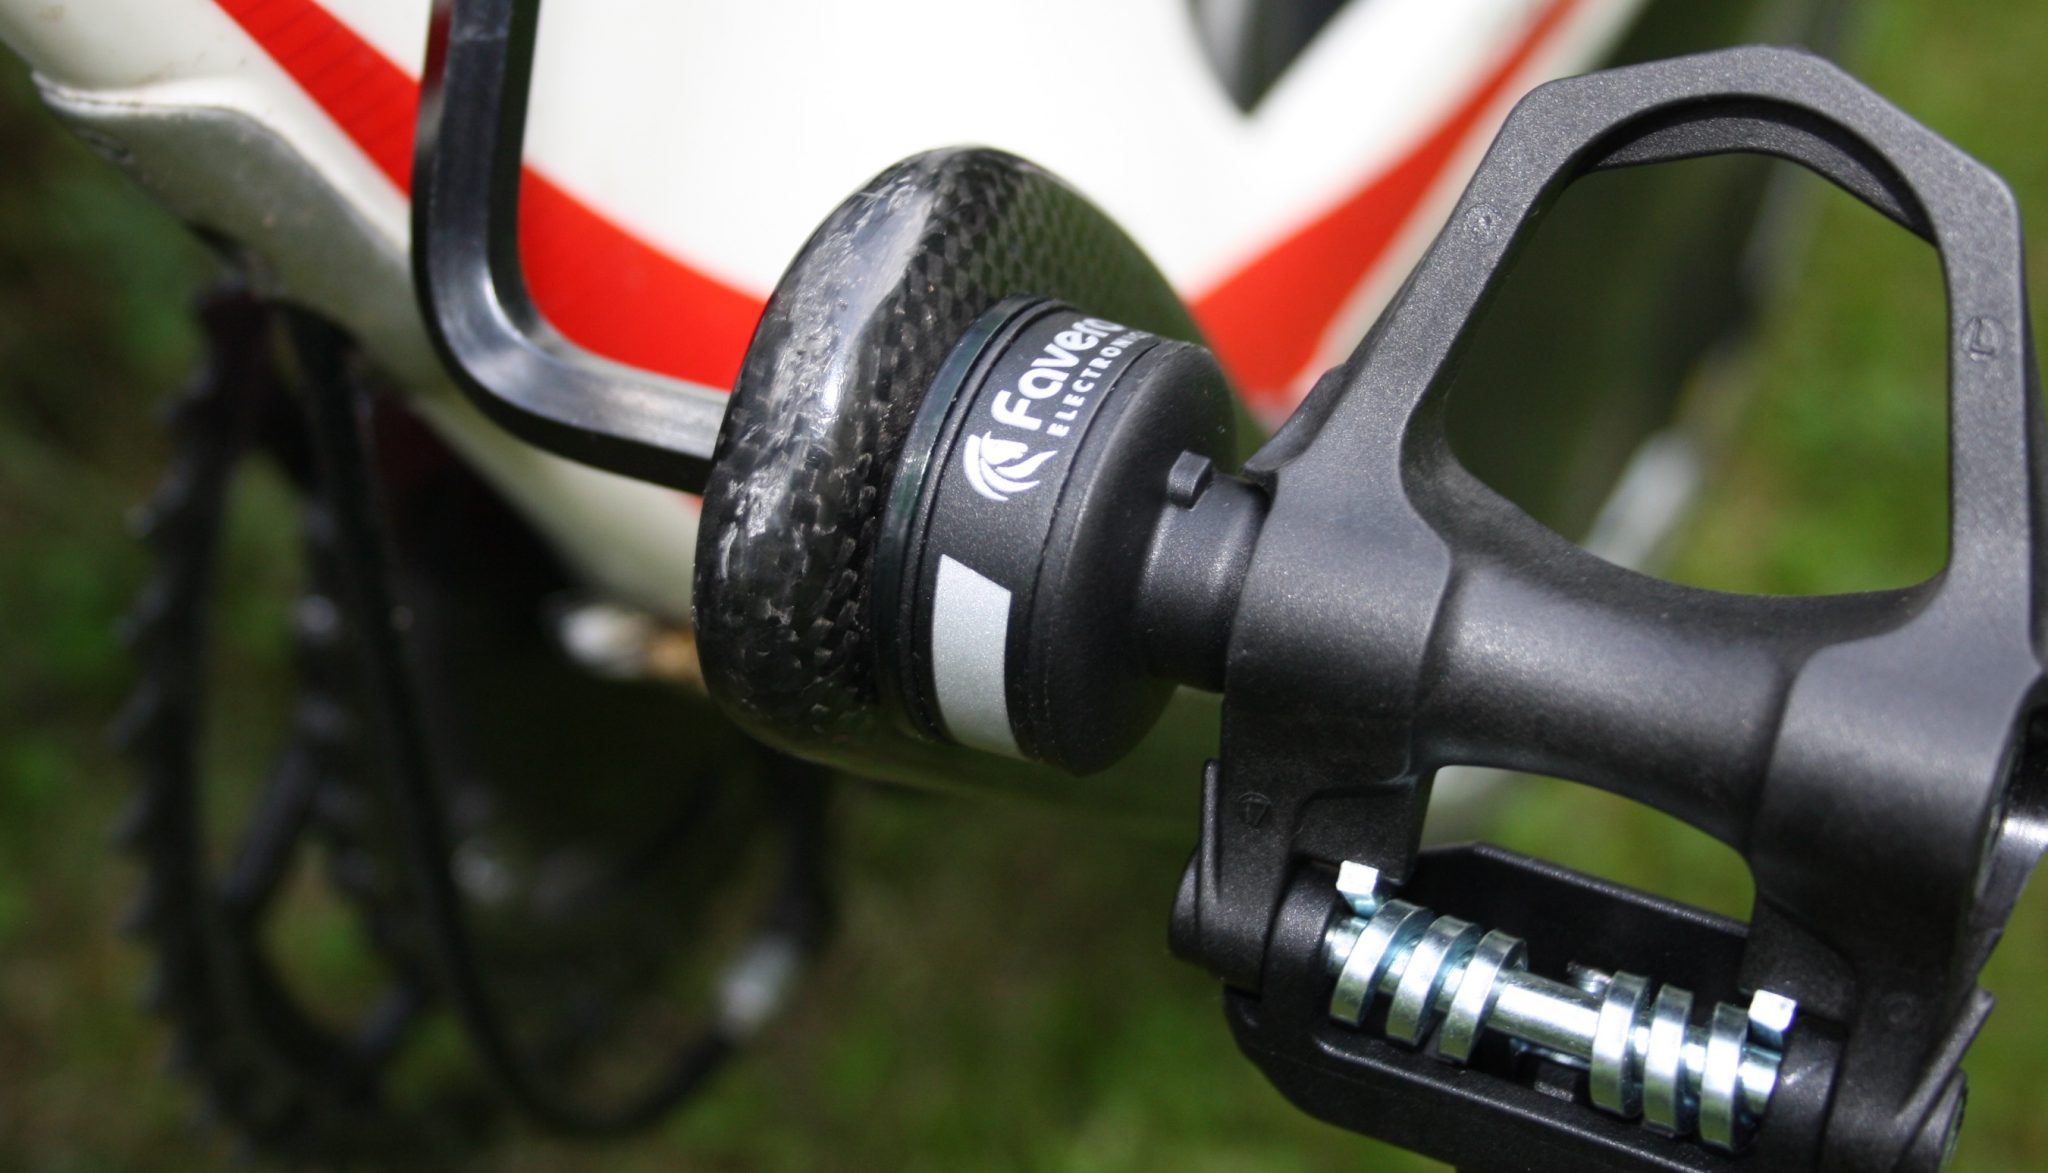 Review Favero Assioma Duo Uno Power Meter Pedal